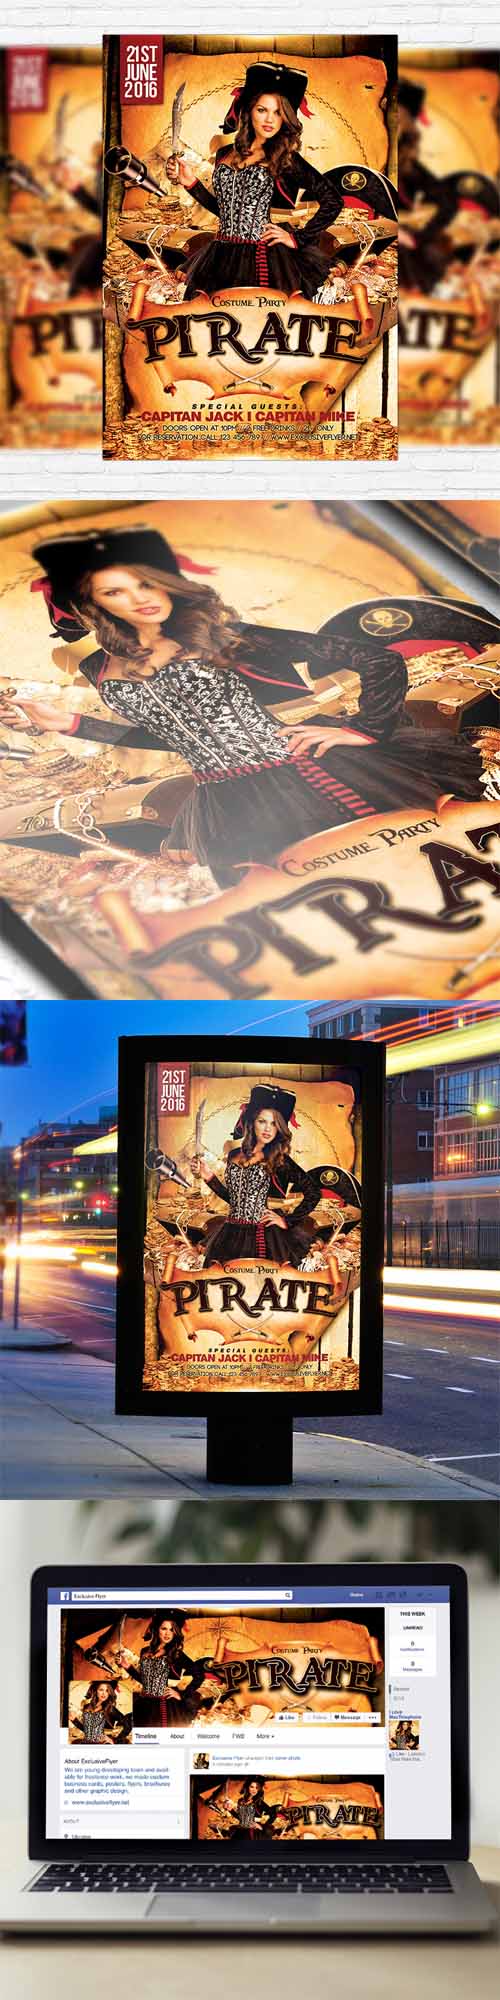 Flyer Template - Costume Pirate Party + Facebook Cover